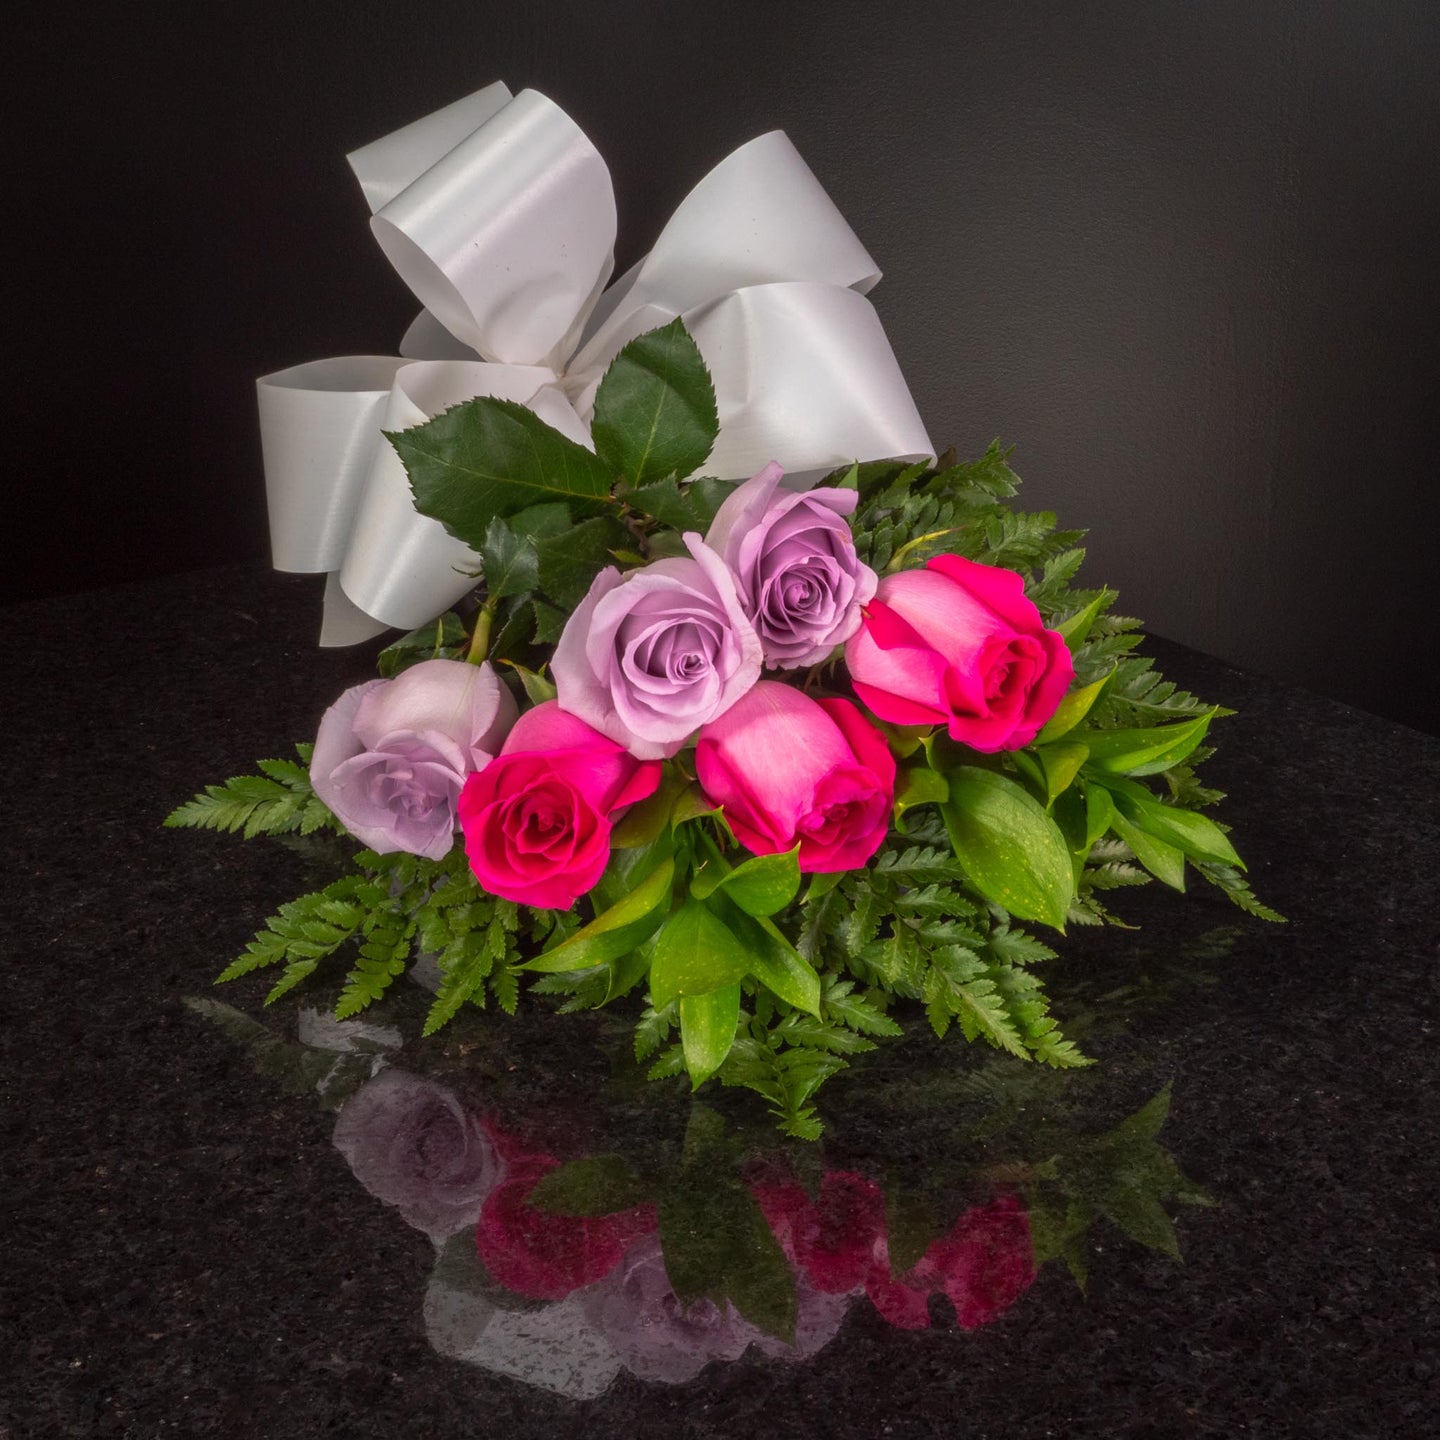 Hot Pink Lavender Roses 6 Roses / Hand-Tied / Basic